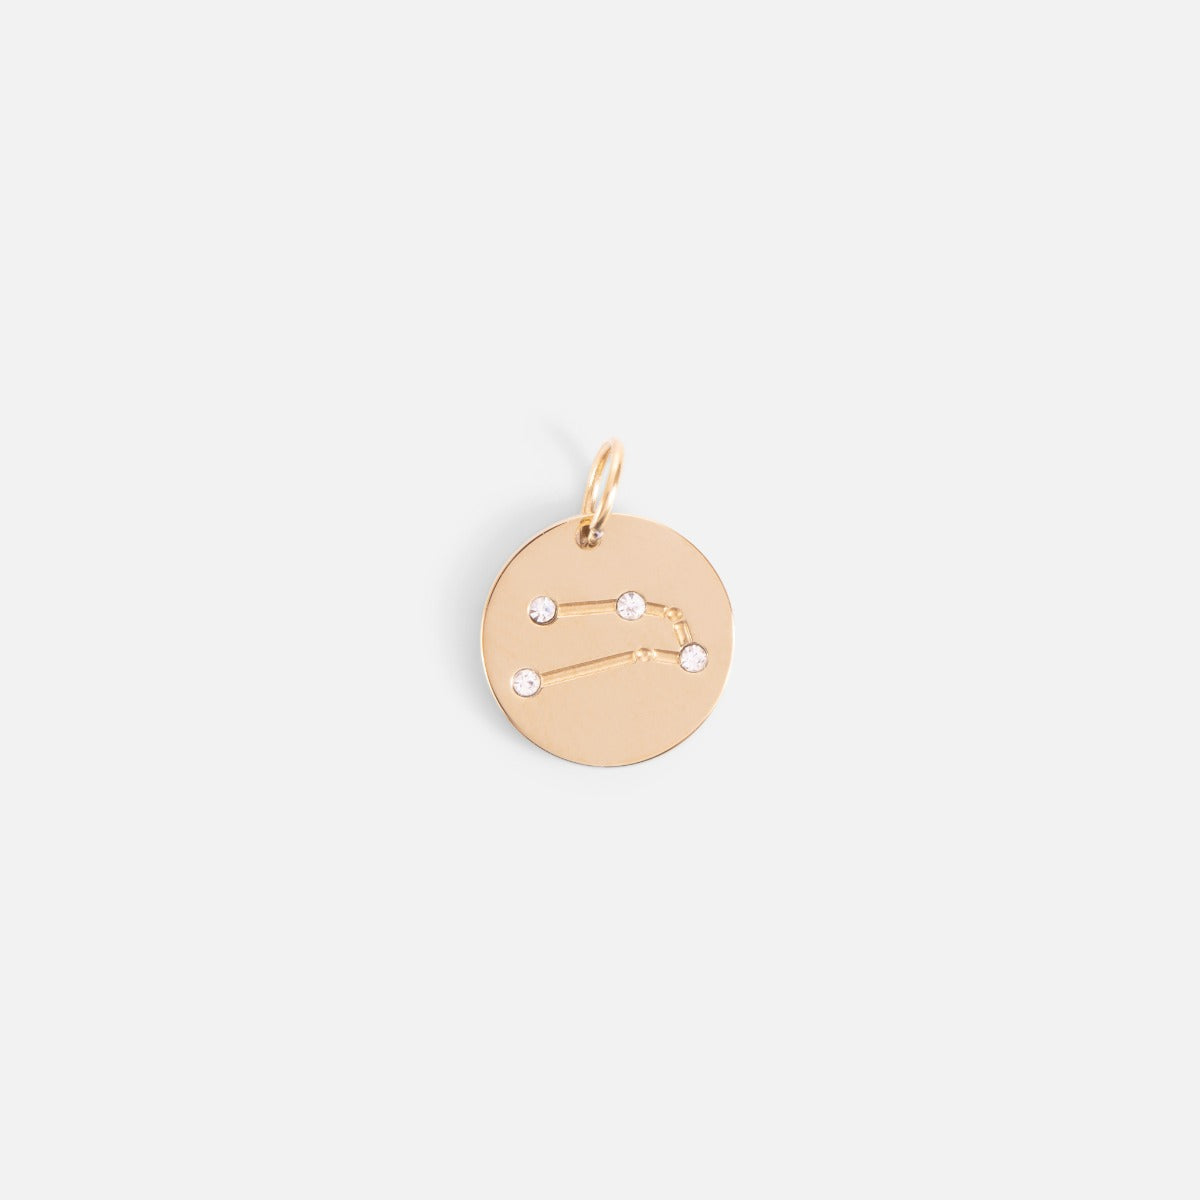 Small golden charm engraved with the zodiac constellation "taurus"